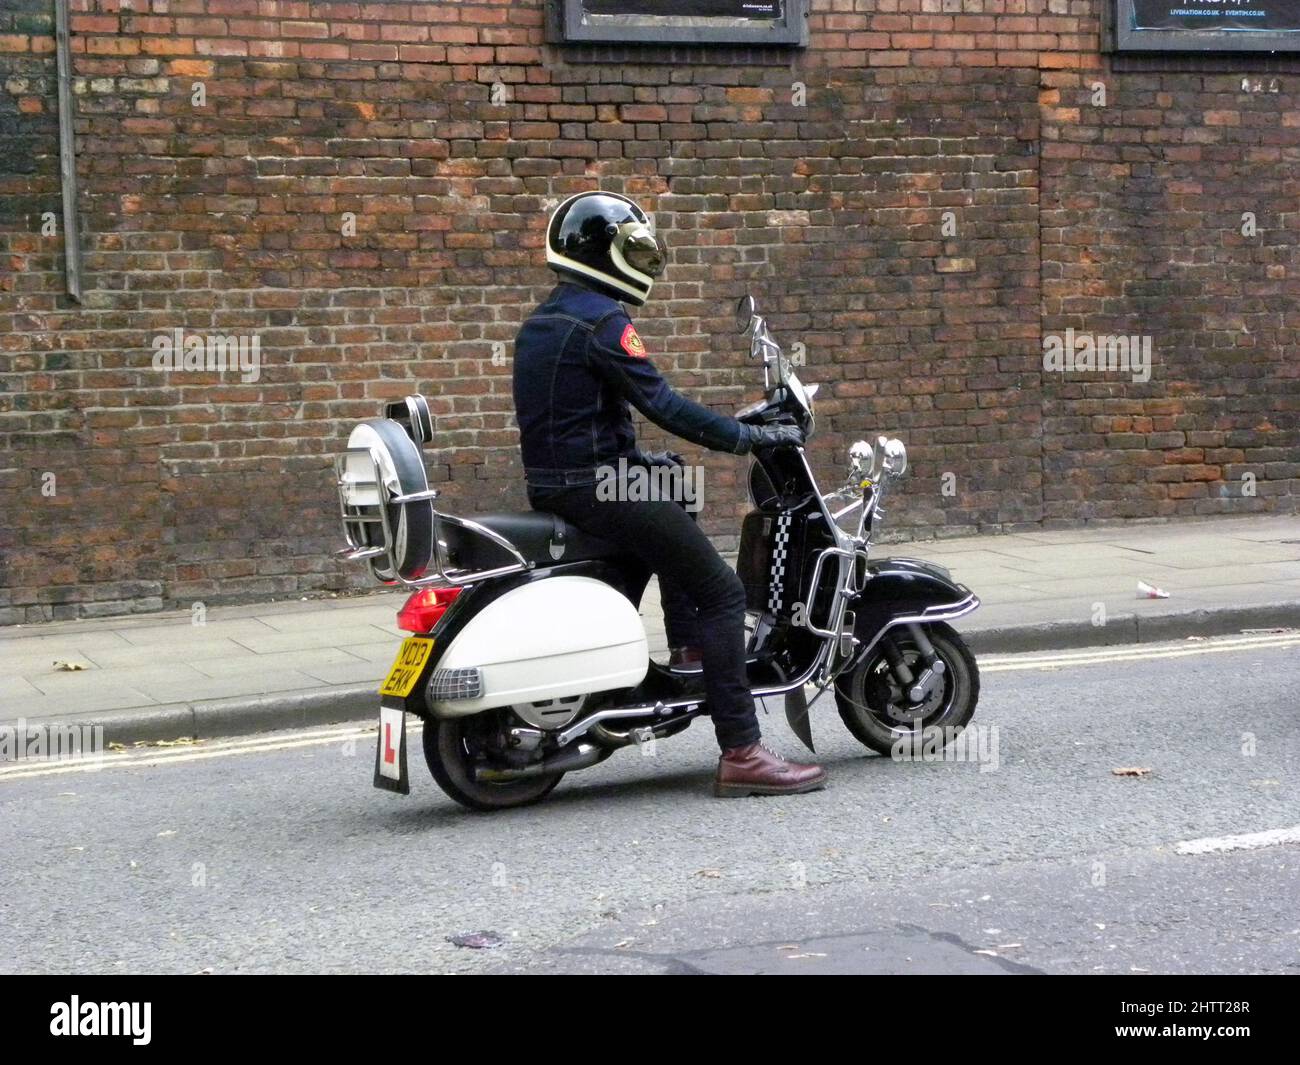 MANCHESTER. GREATER MANCHESTER. ENGLAND. 10-17-2016 Water Street. Scooter and Dr. Martens. Stock Photo